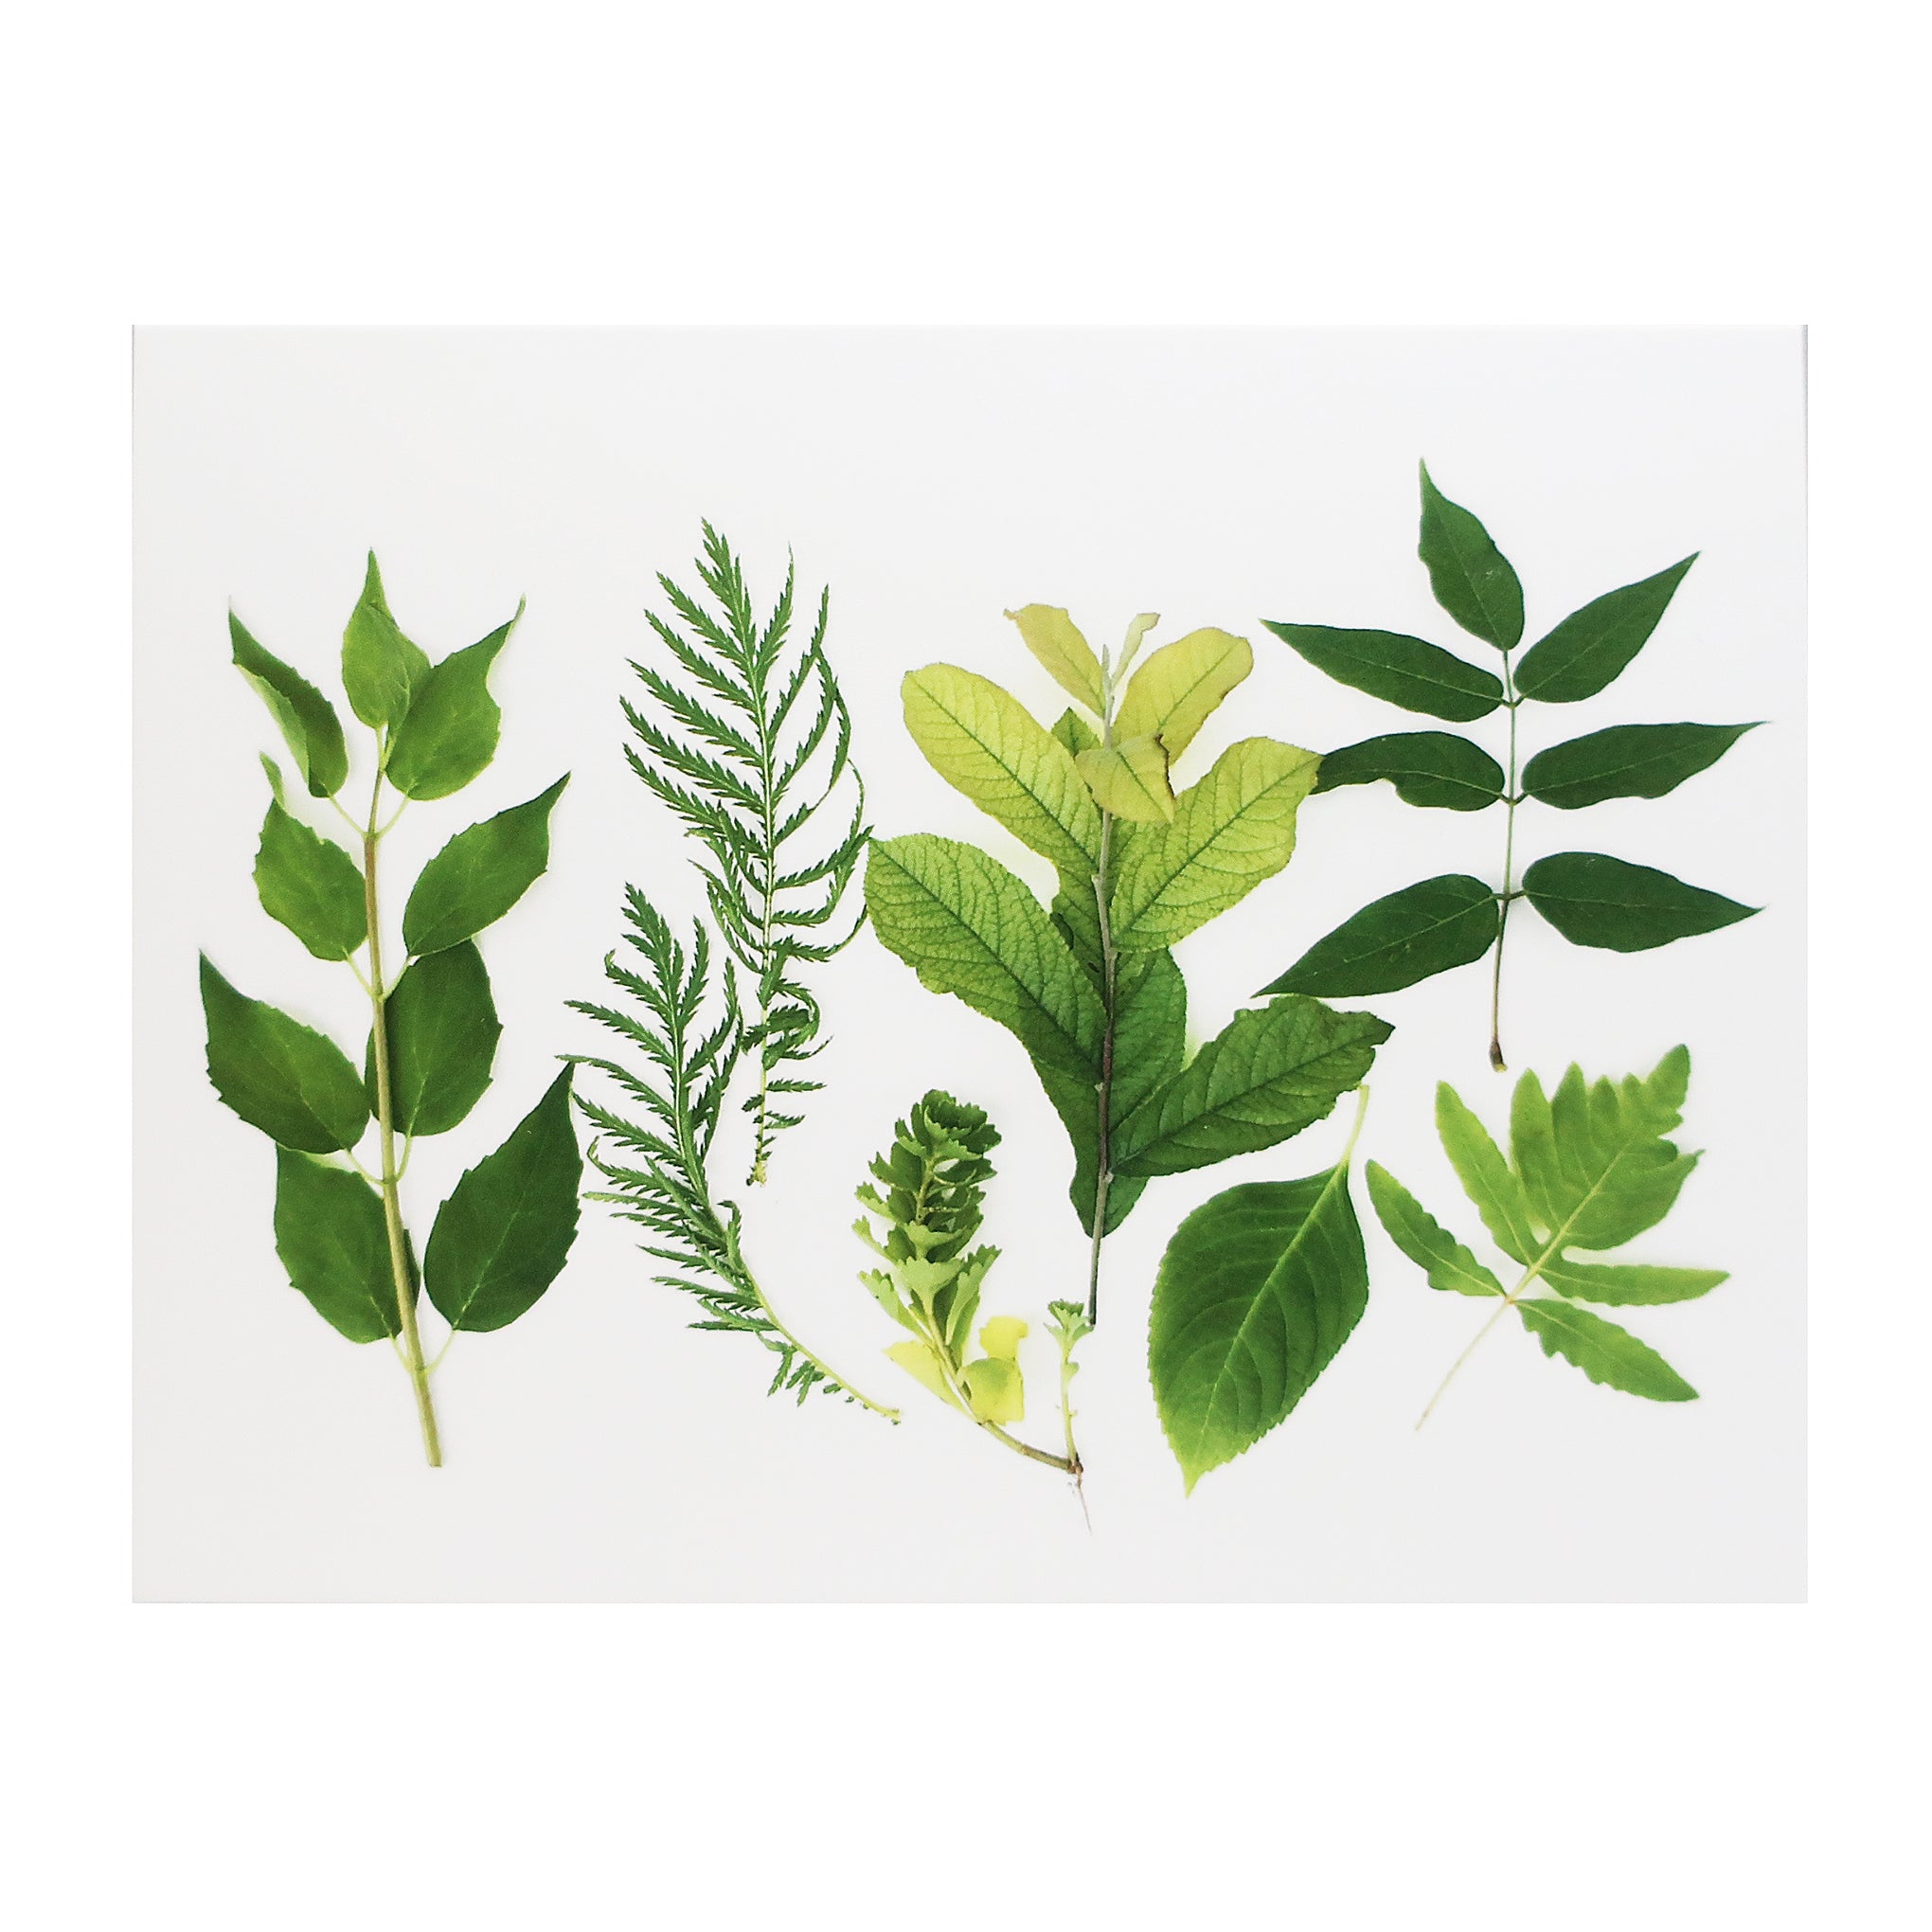 Blank Folding Greeting Card in Various Shades of Green Leaves Of Summer